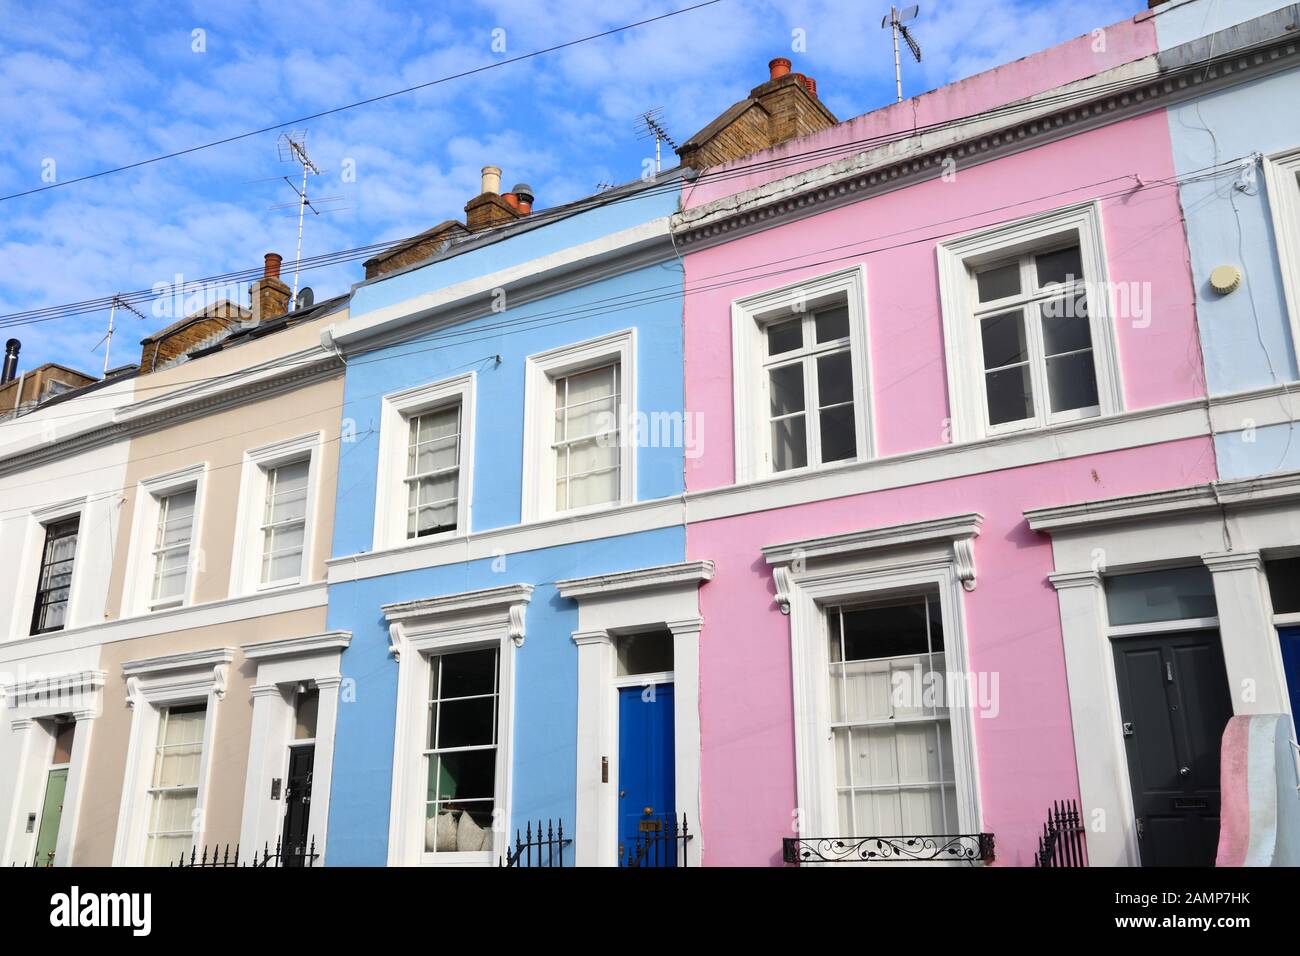 Notting Hill, London. Colorful residential neighborhood architecture. Stock Photo